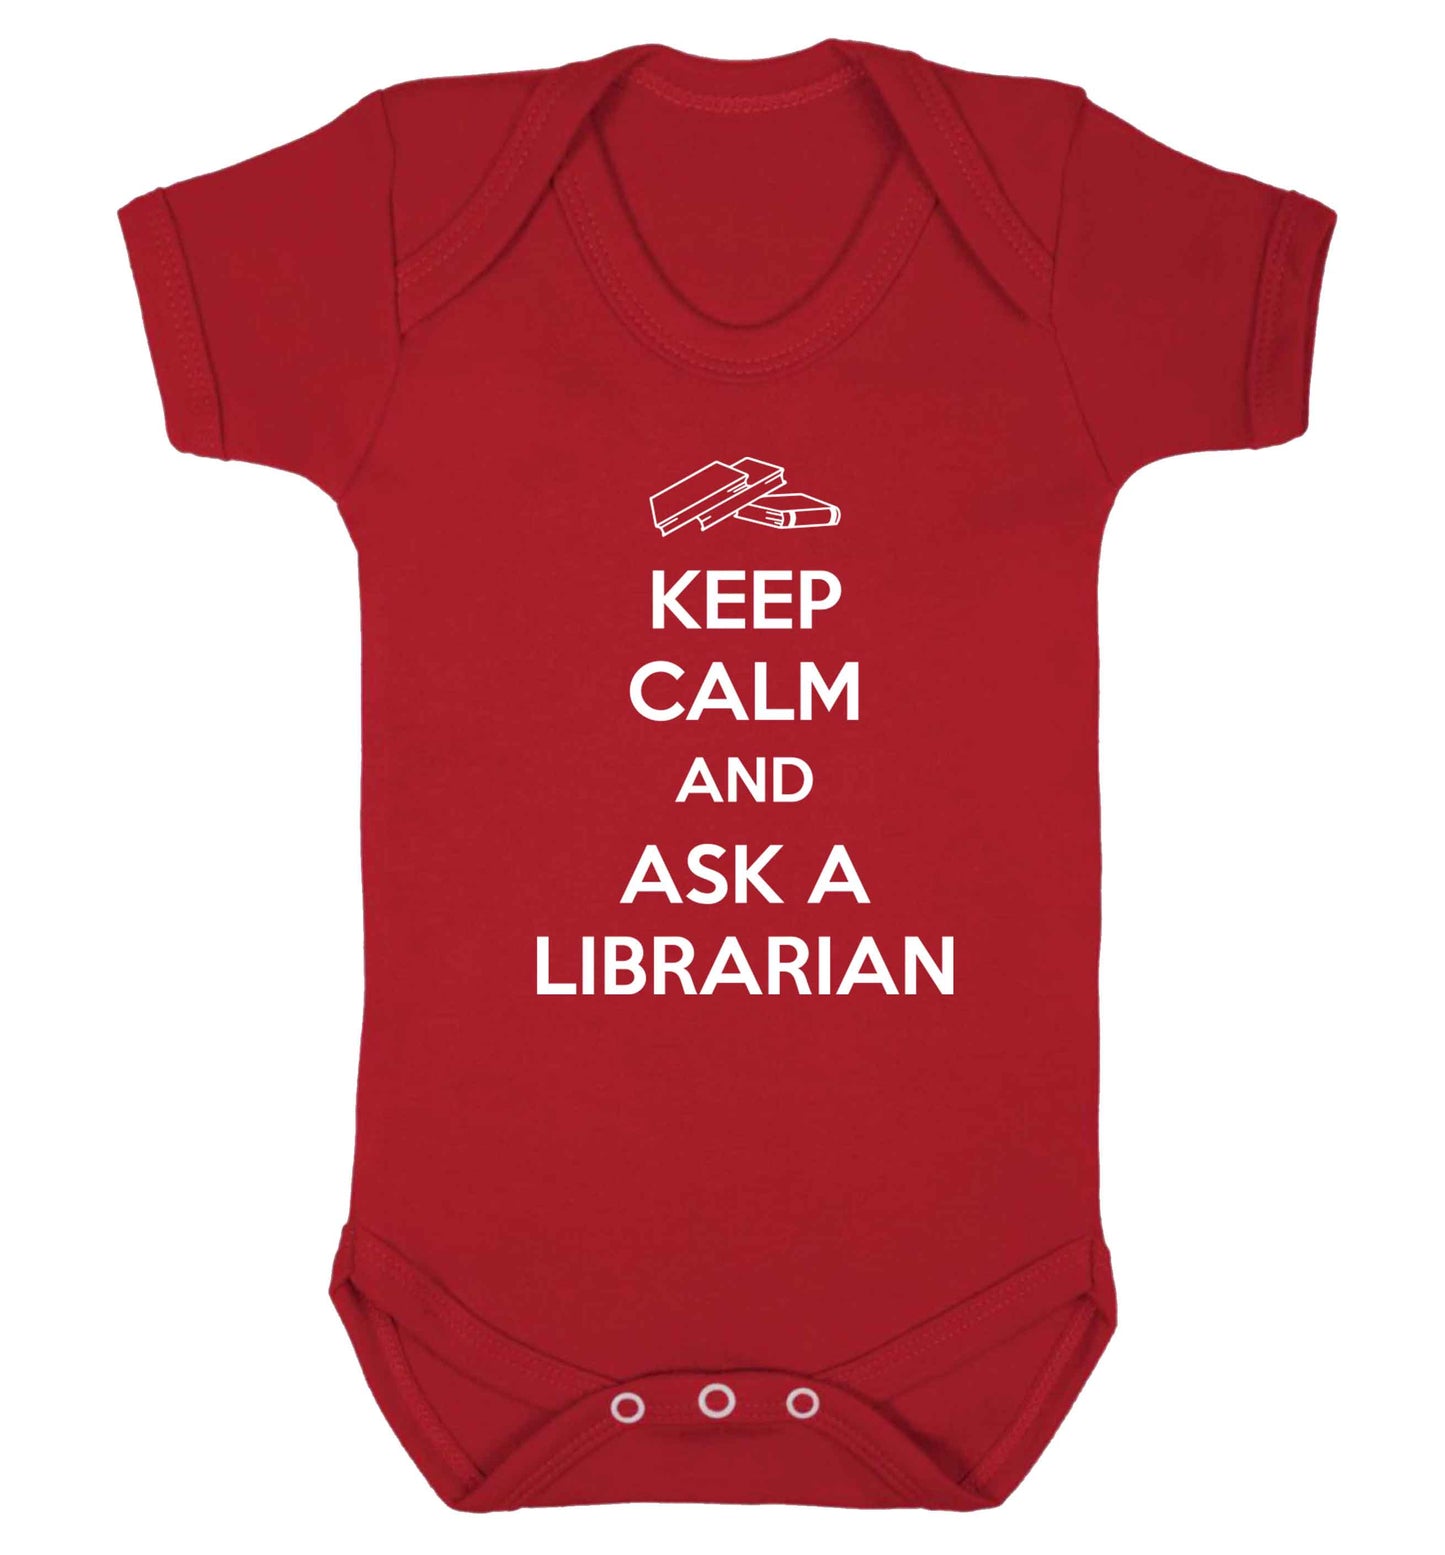 Keep calm and ask a librarian Baby Vest red 18-24 months